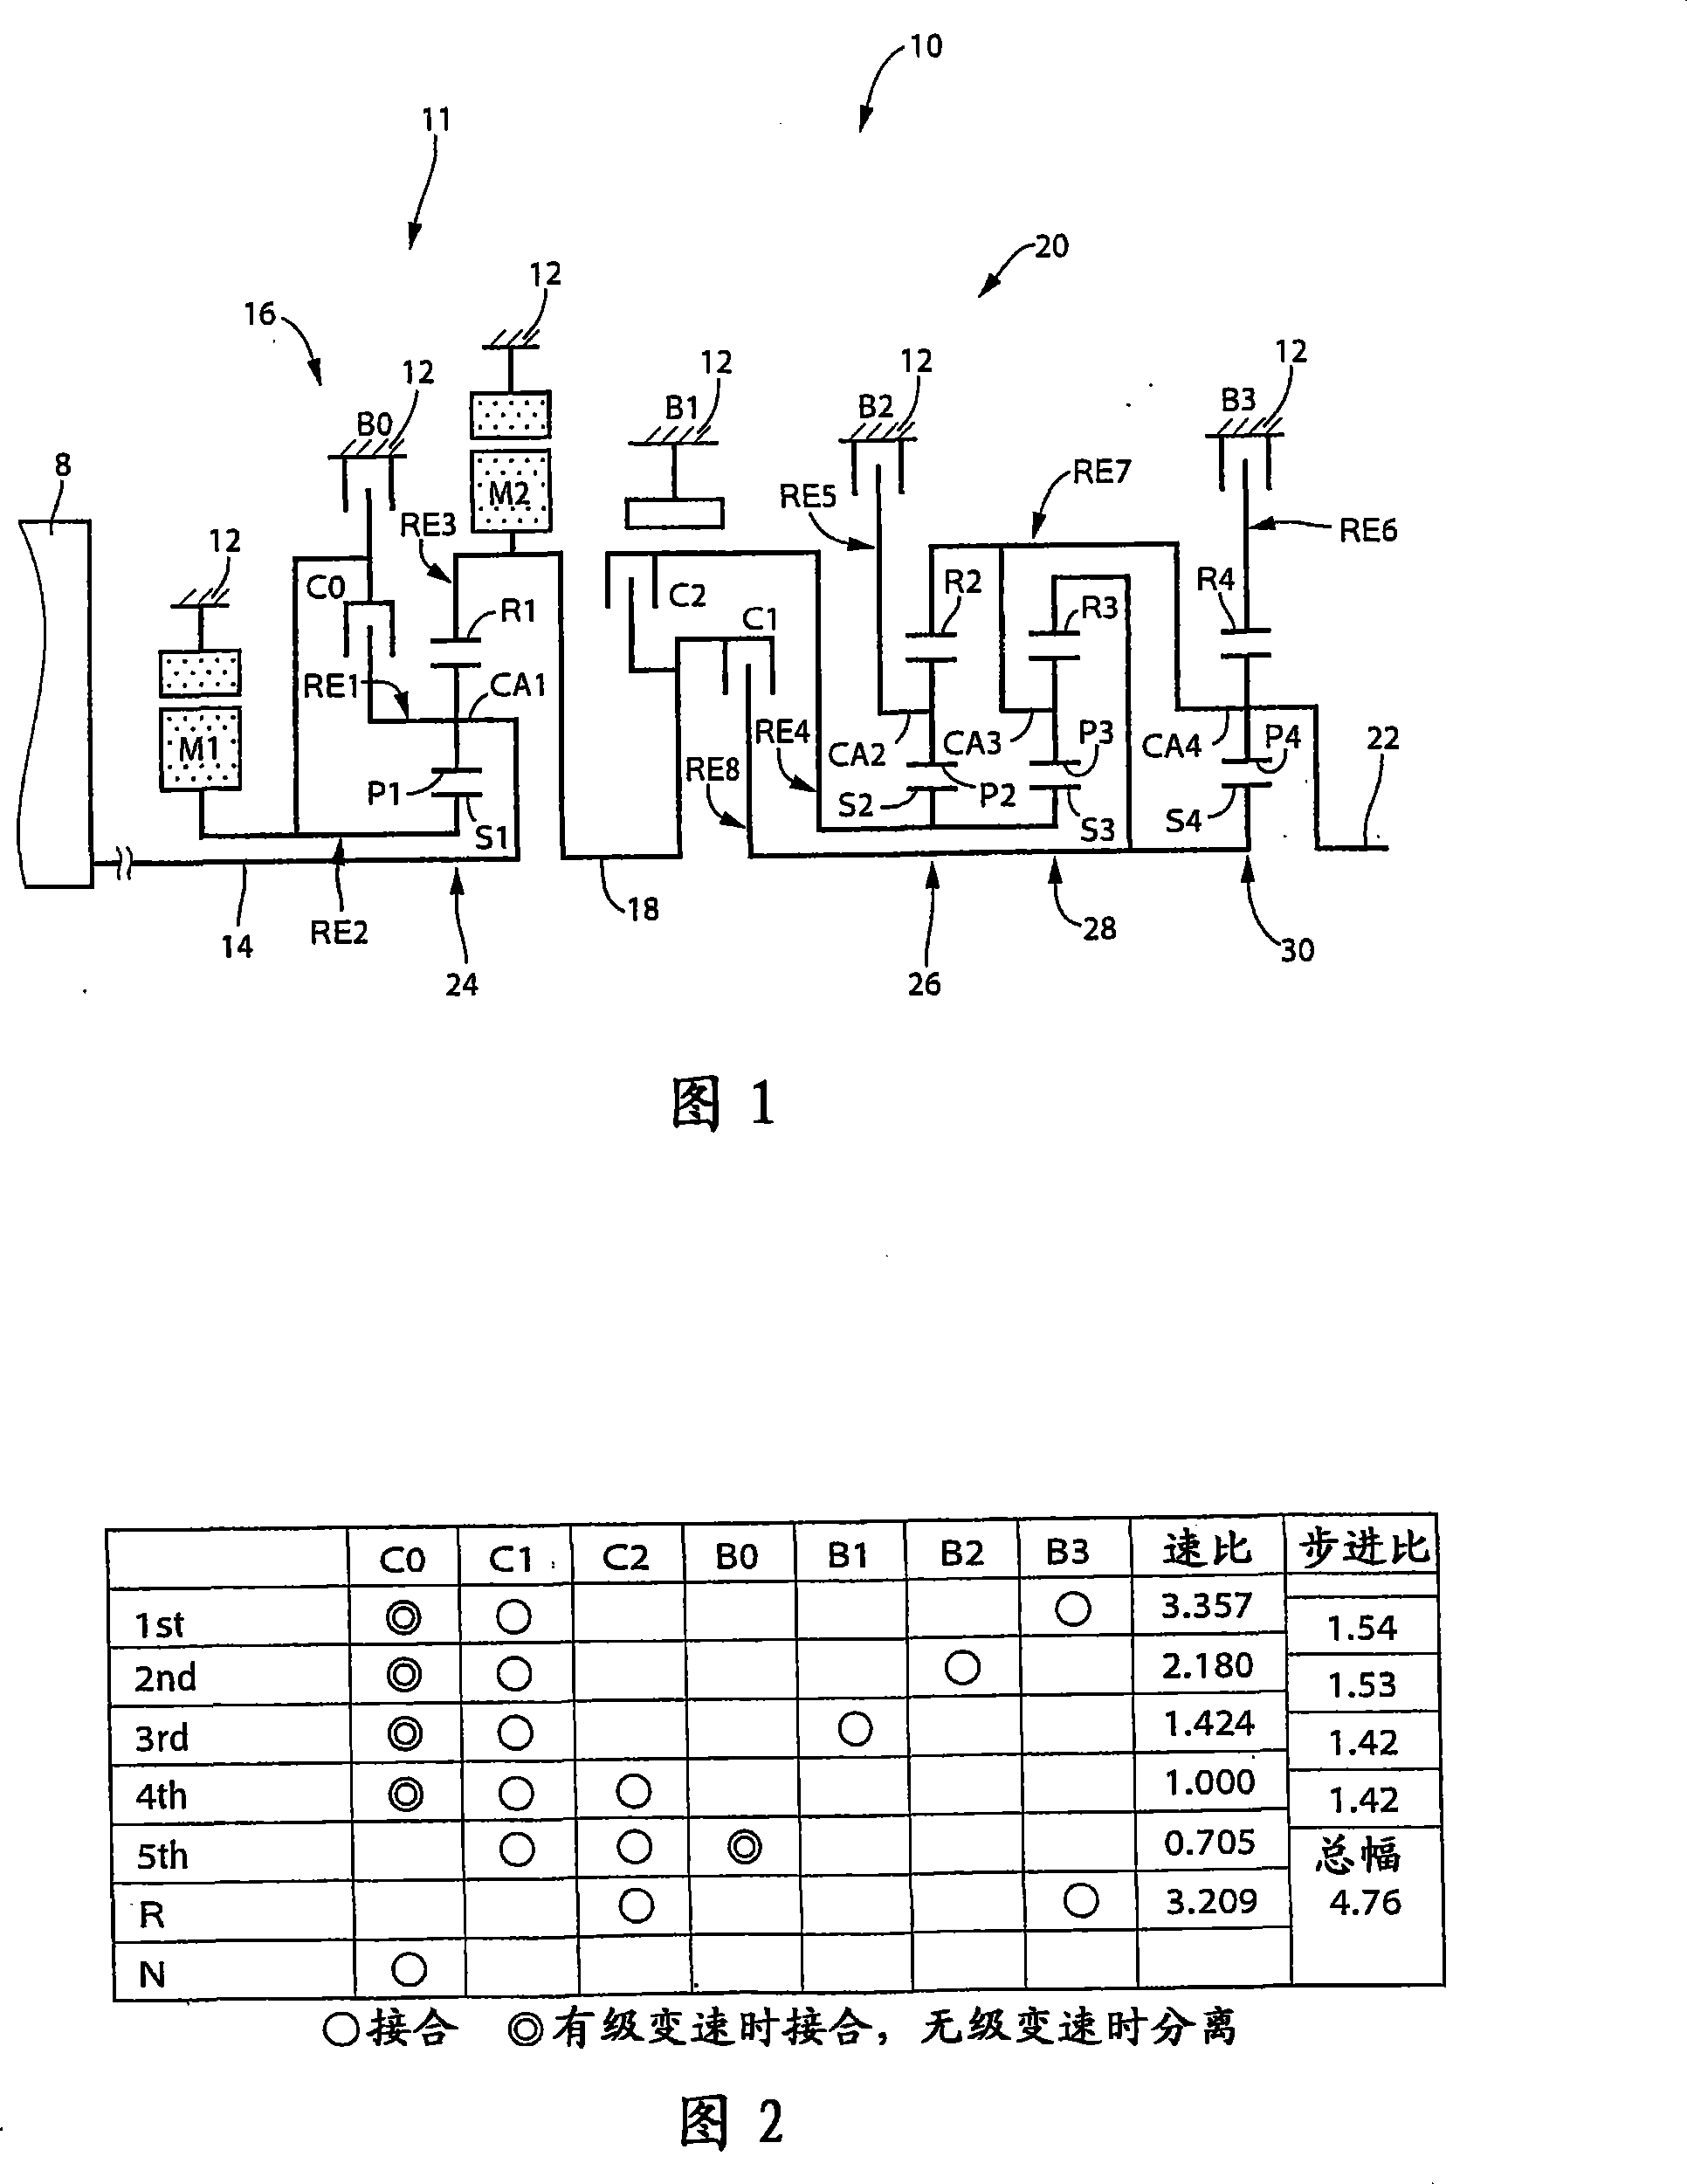 Vehicle drive device controller